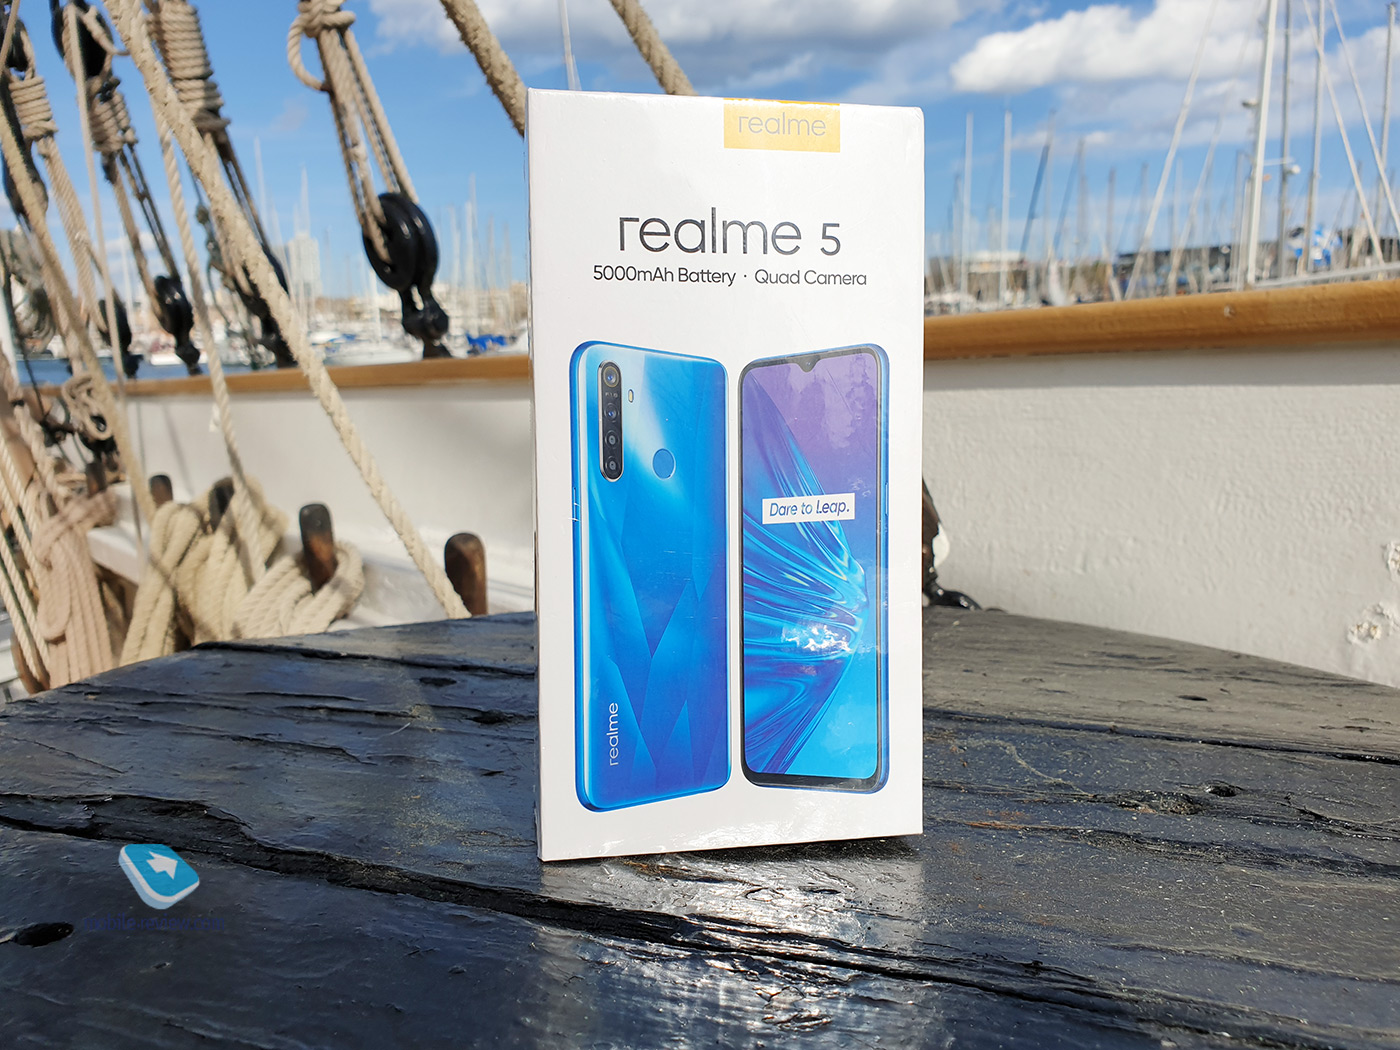 The difference is 2 rubles: realme 000 or realme 5 Pro